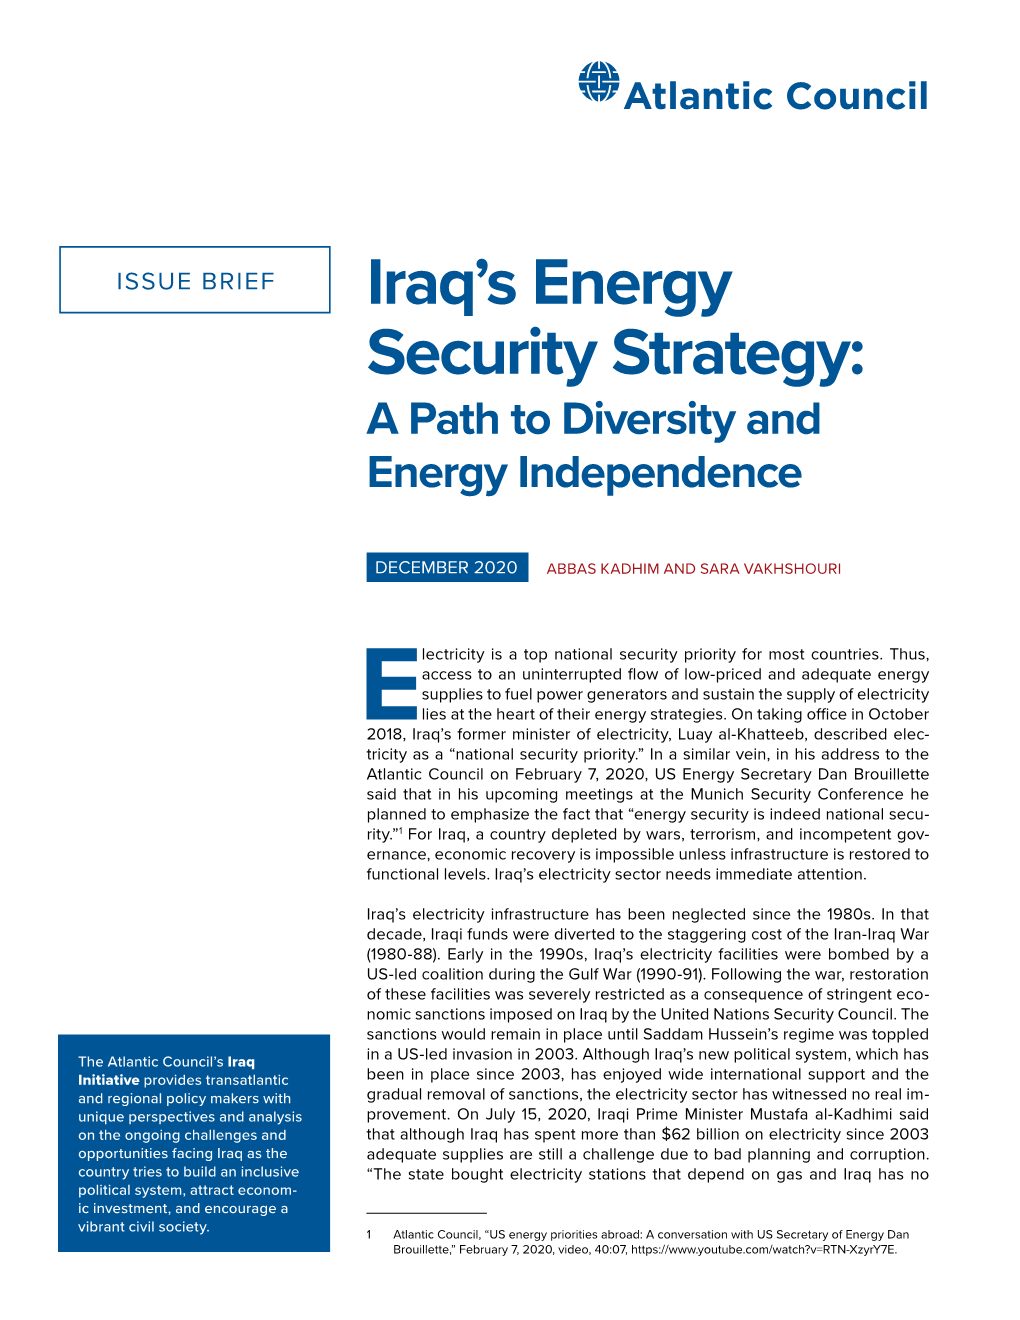 Iraq's Energy Security Strategy